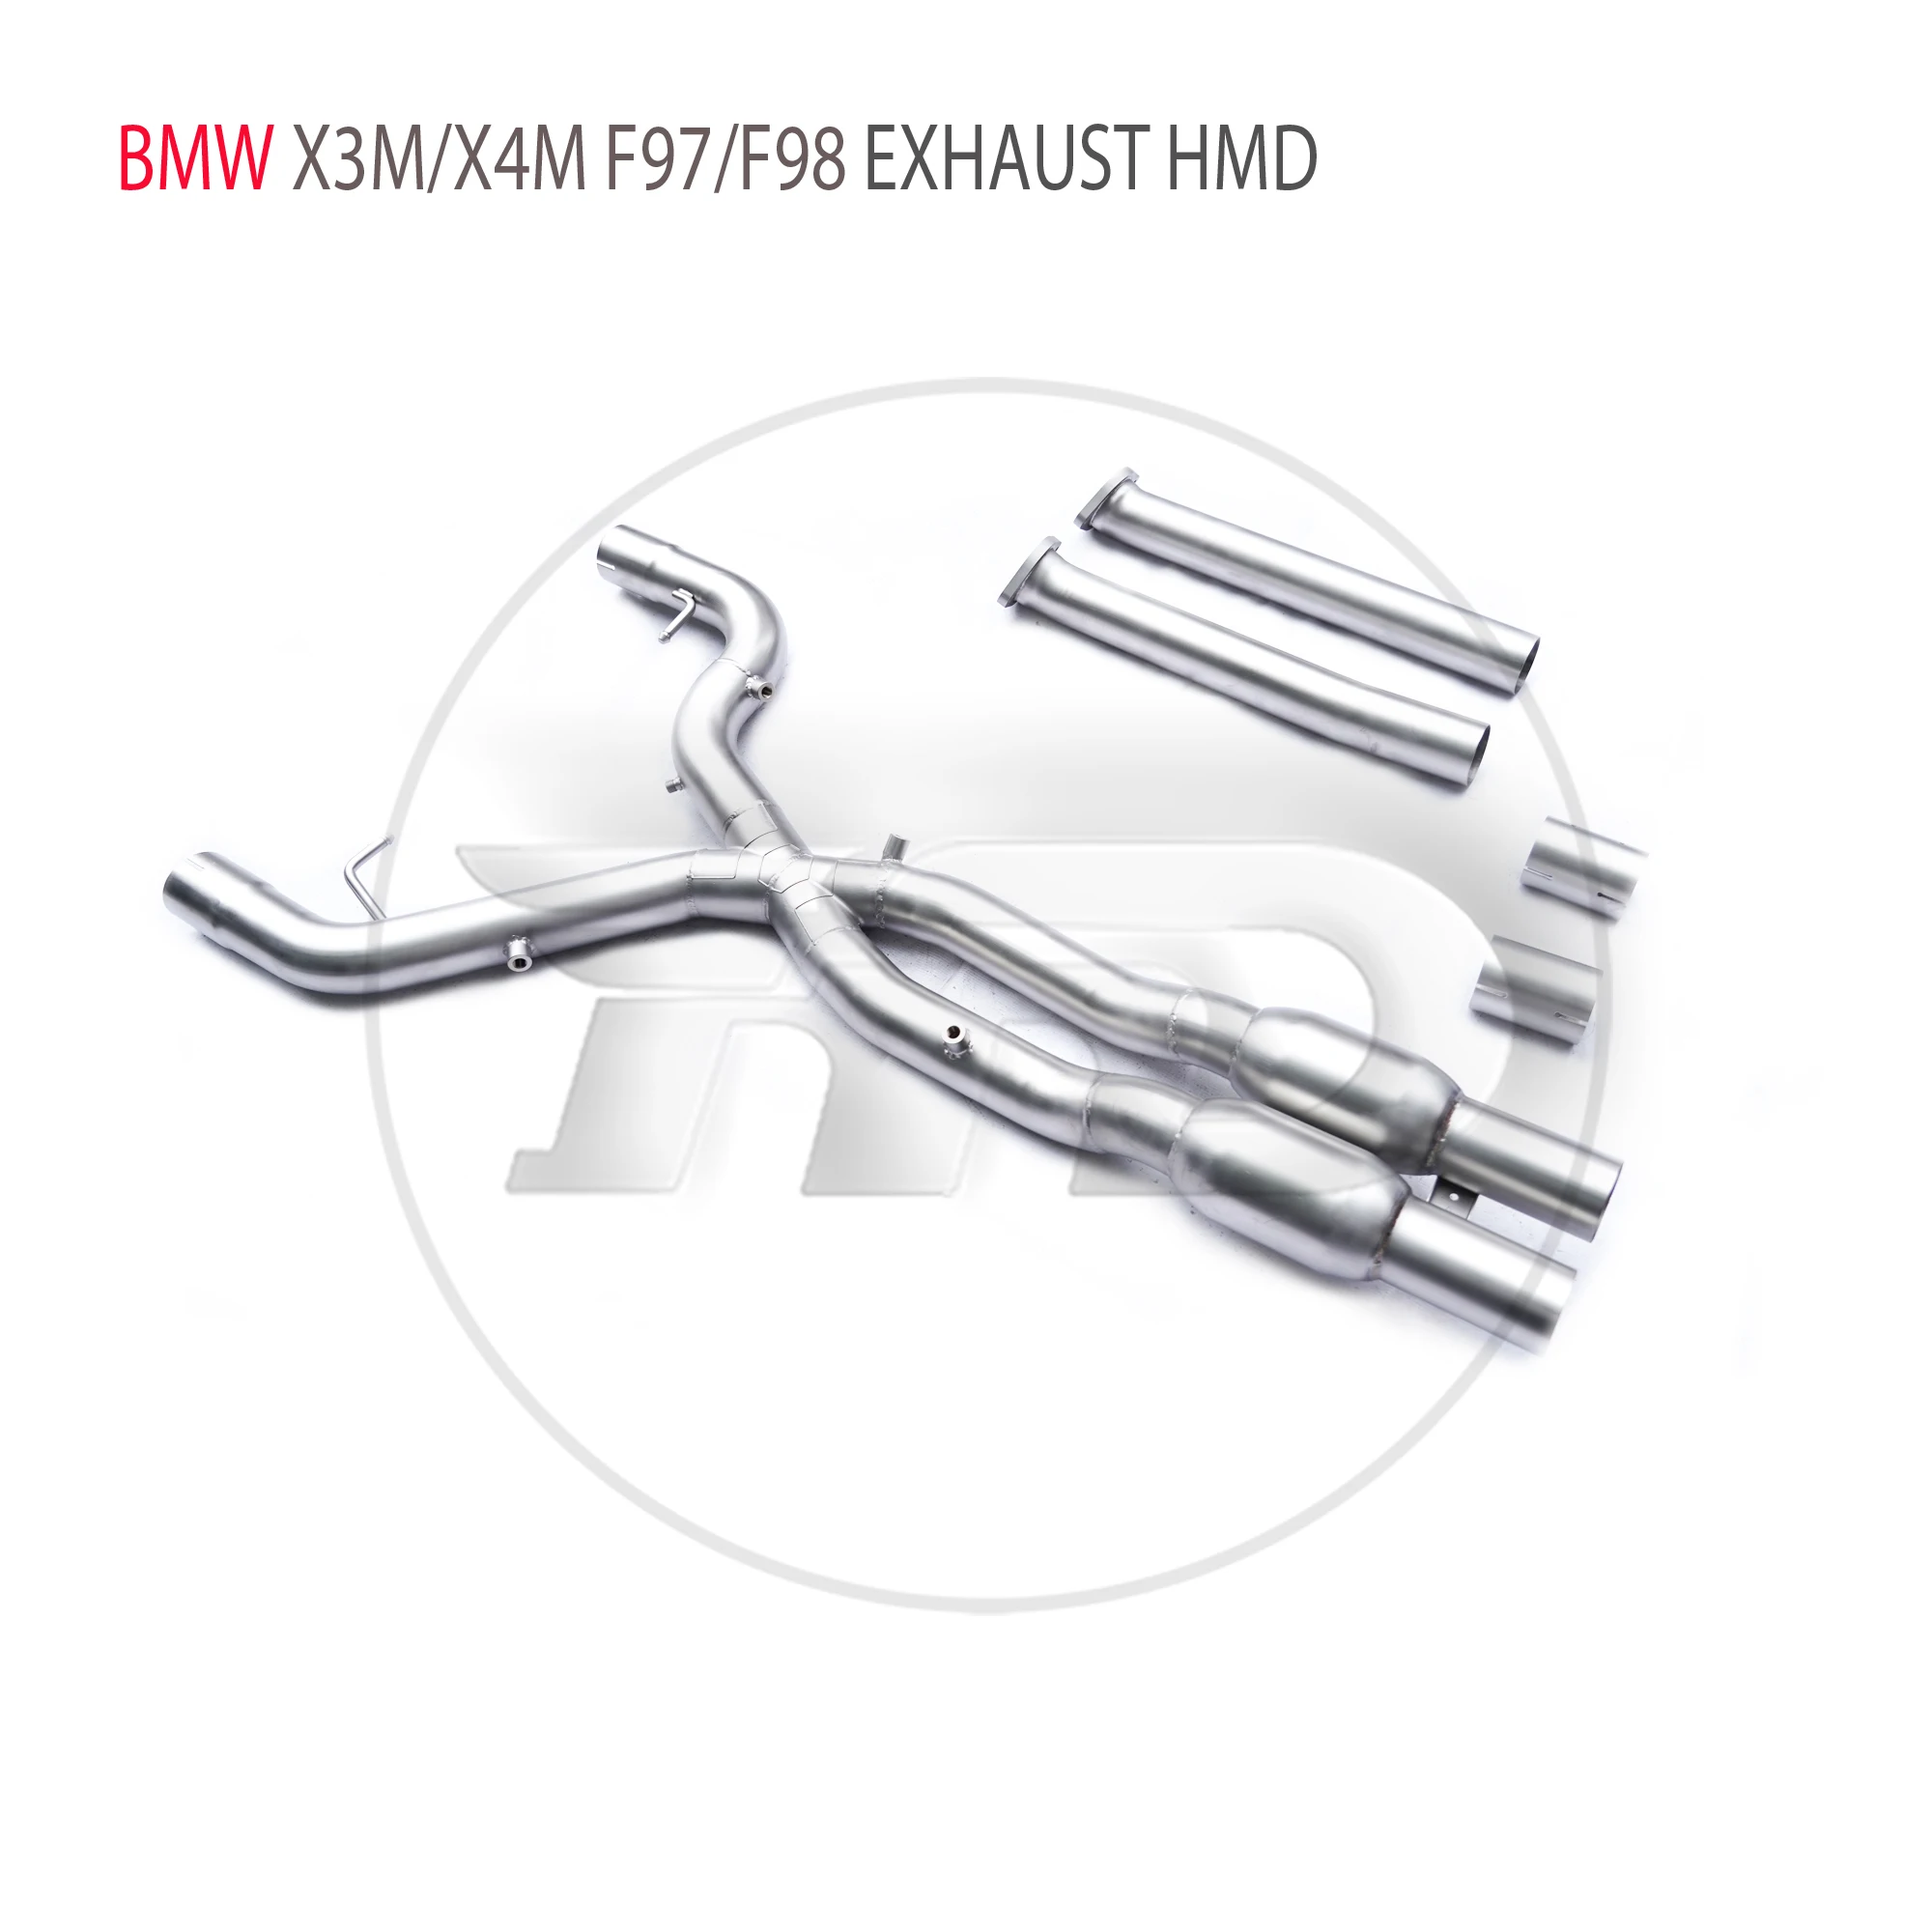 

HMD Stainless Steel Exhaust System Racing Middle Pipe For BMW X3M X4M F97 F98 2019+ Test Tube